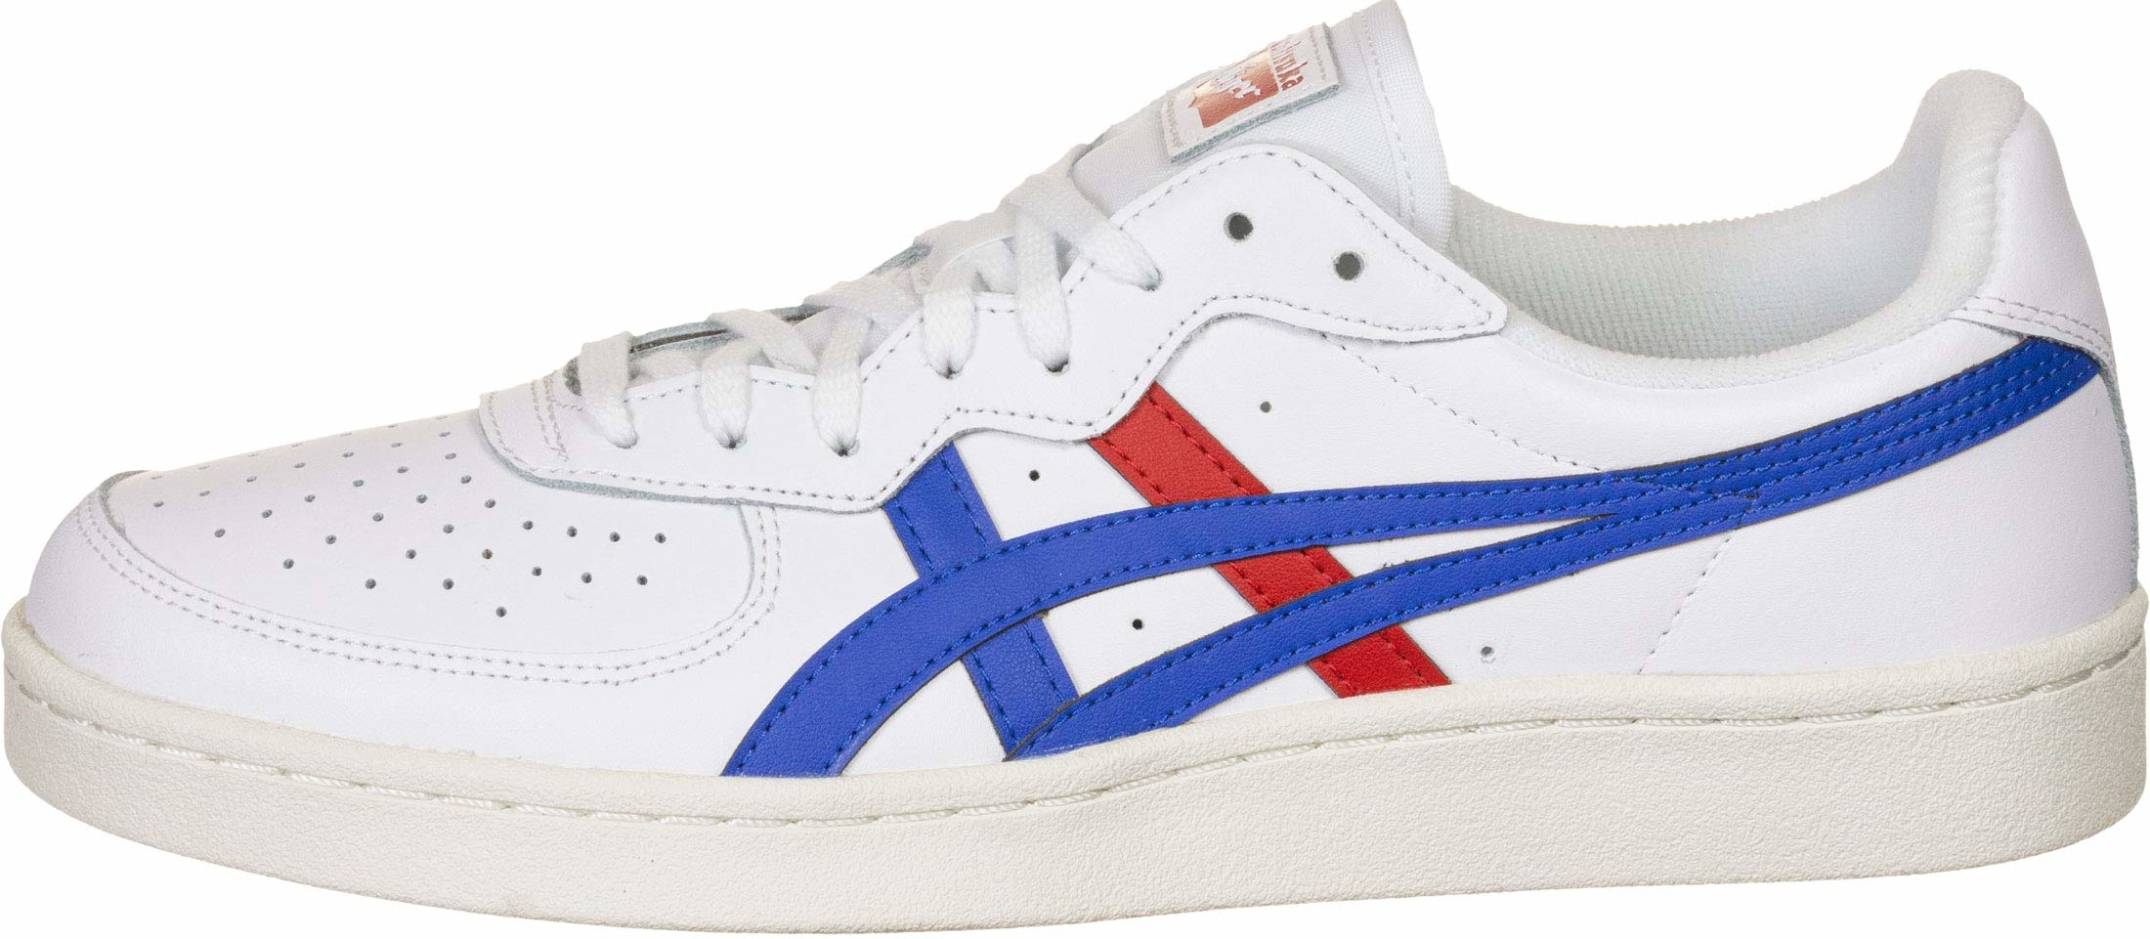 Only $50 + Review of Onitsuka Tiger GSM 